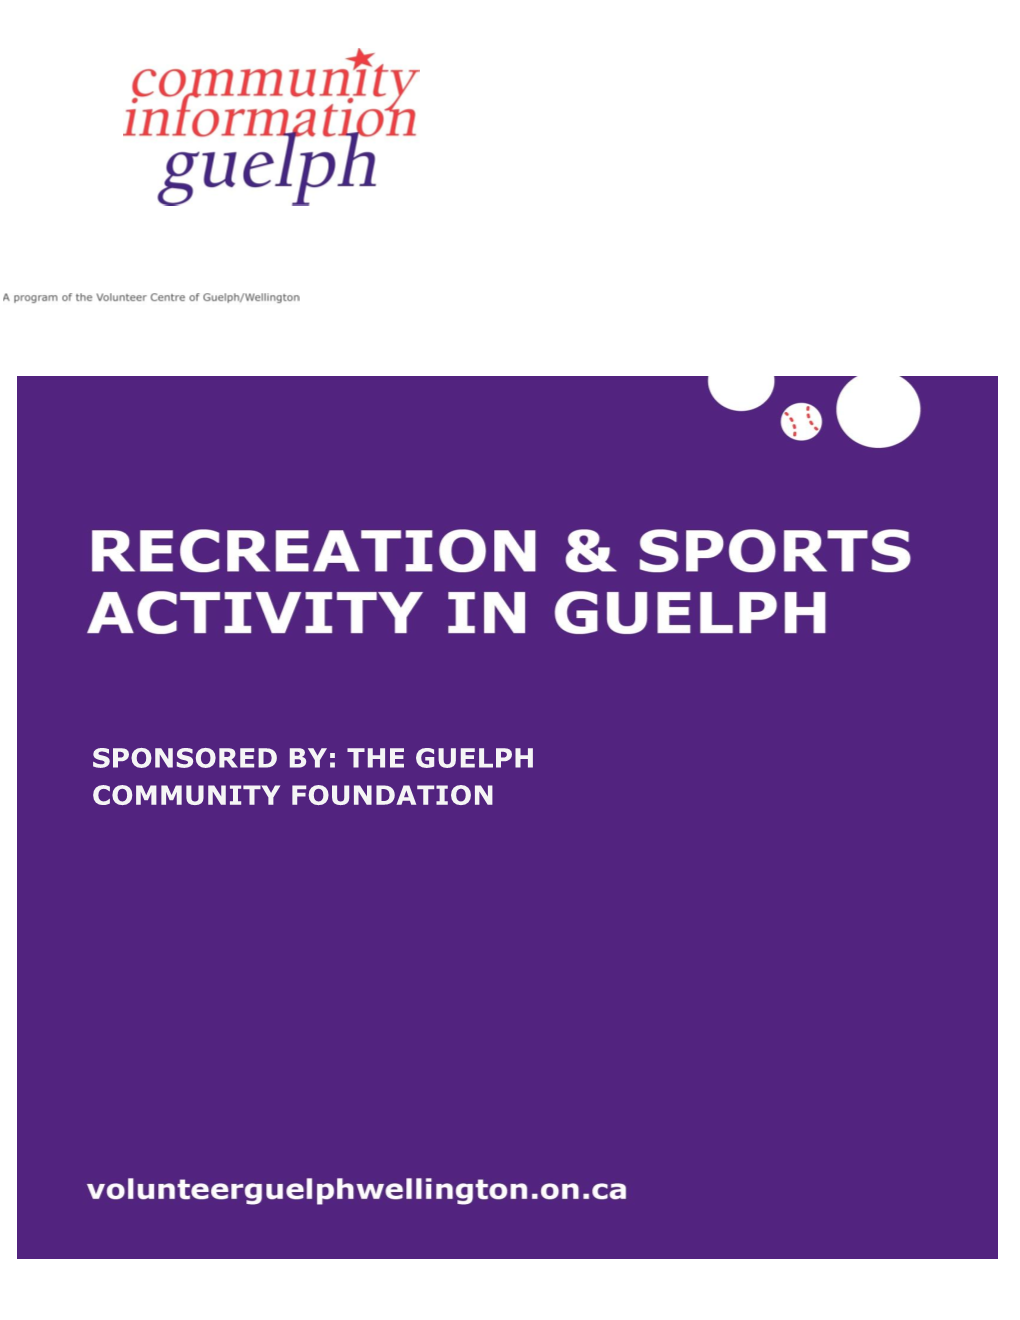 THE GUELPH COMMUNITY FOUNDATION Welcome to the Handbook for Recreation & Sports Activity in Guelph